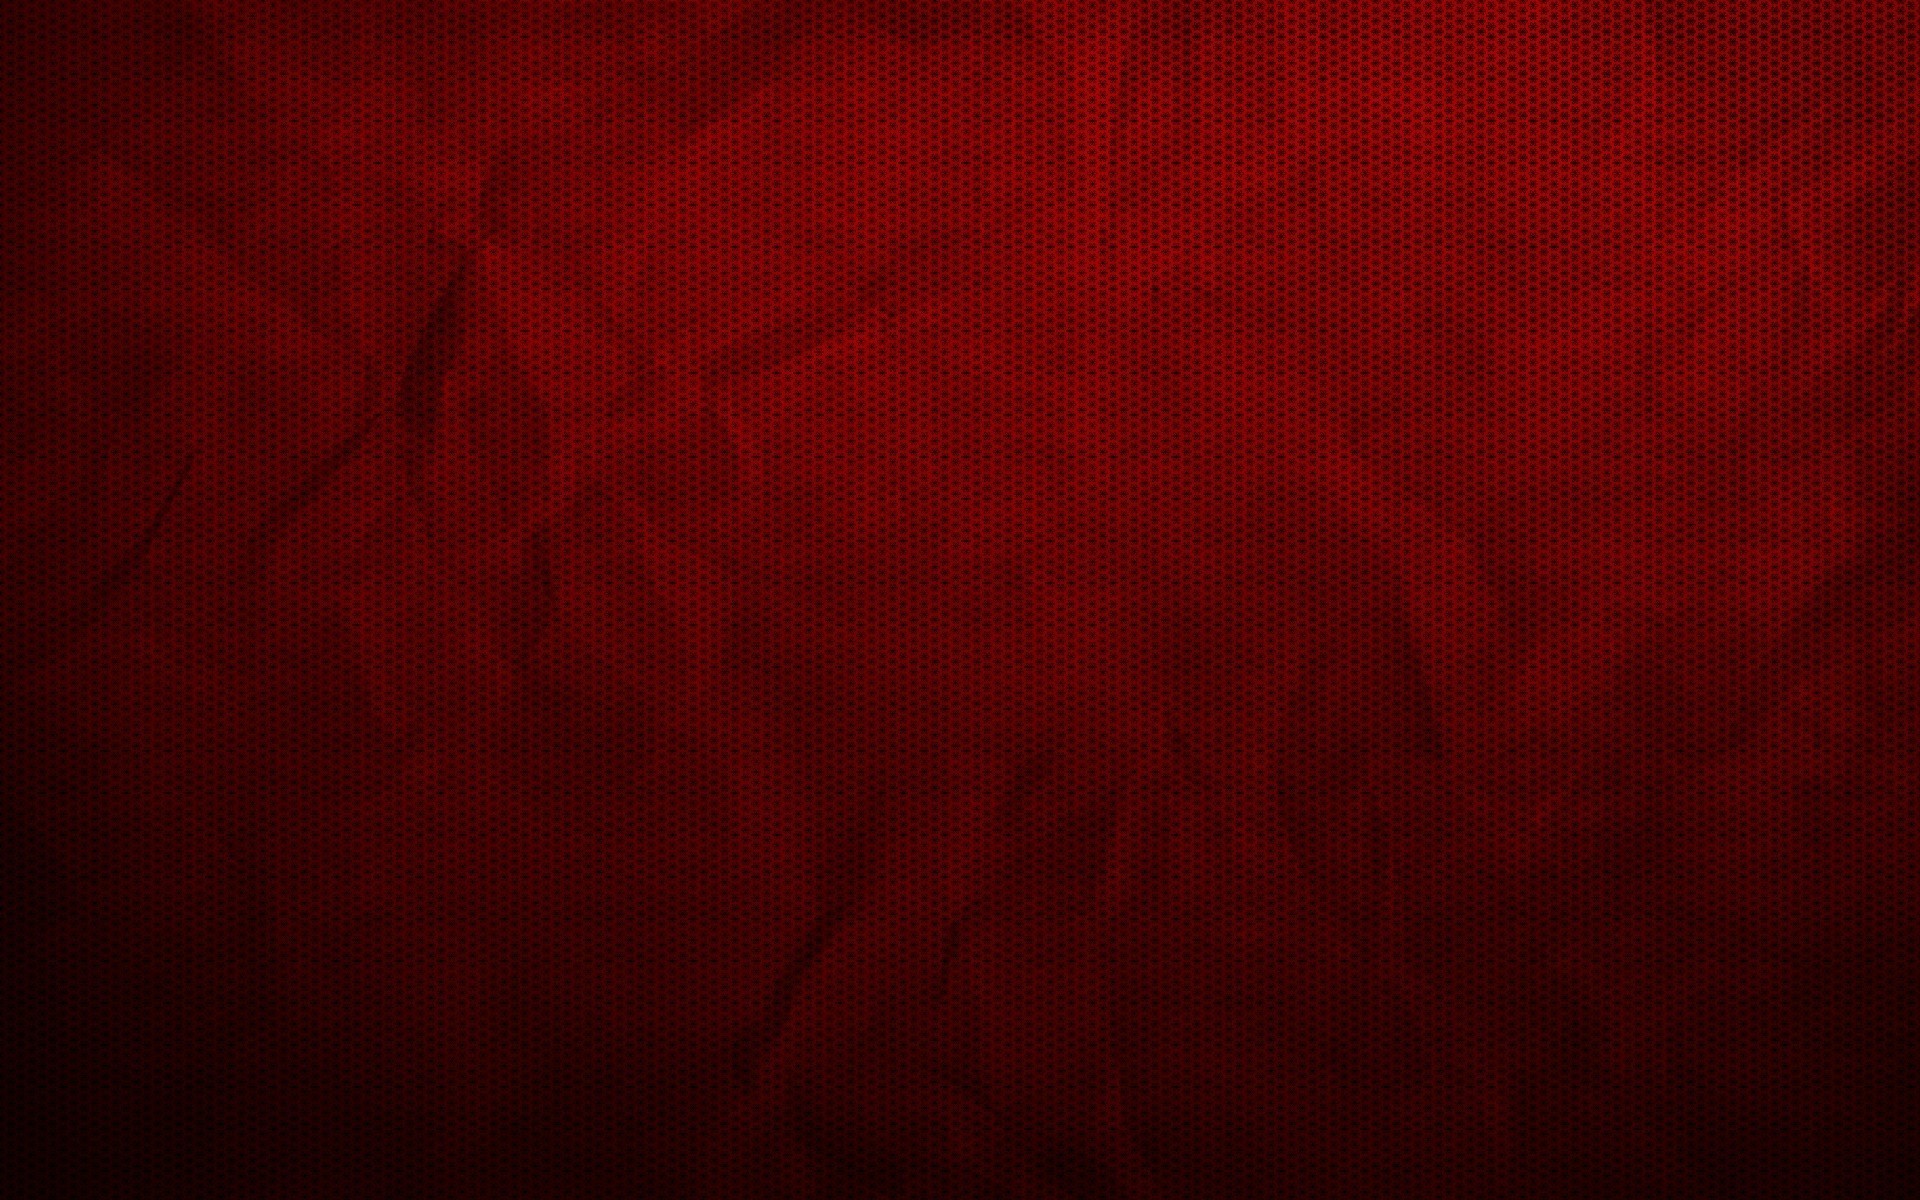 1920x1200 Marun-dark-red-color-plain-background-hd-wallpapers-gallery